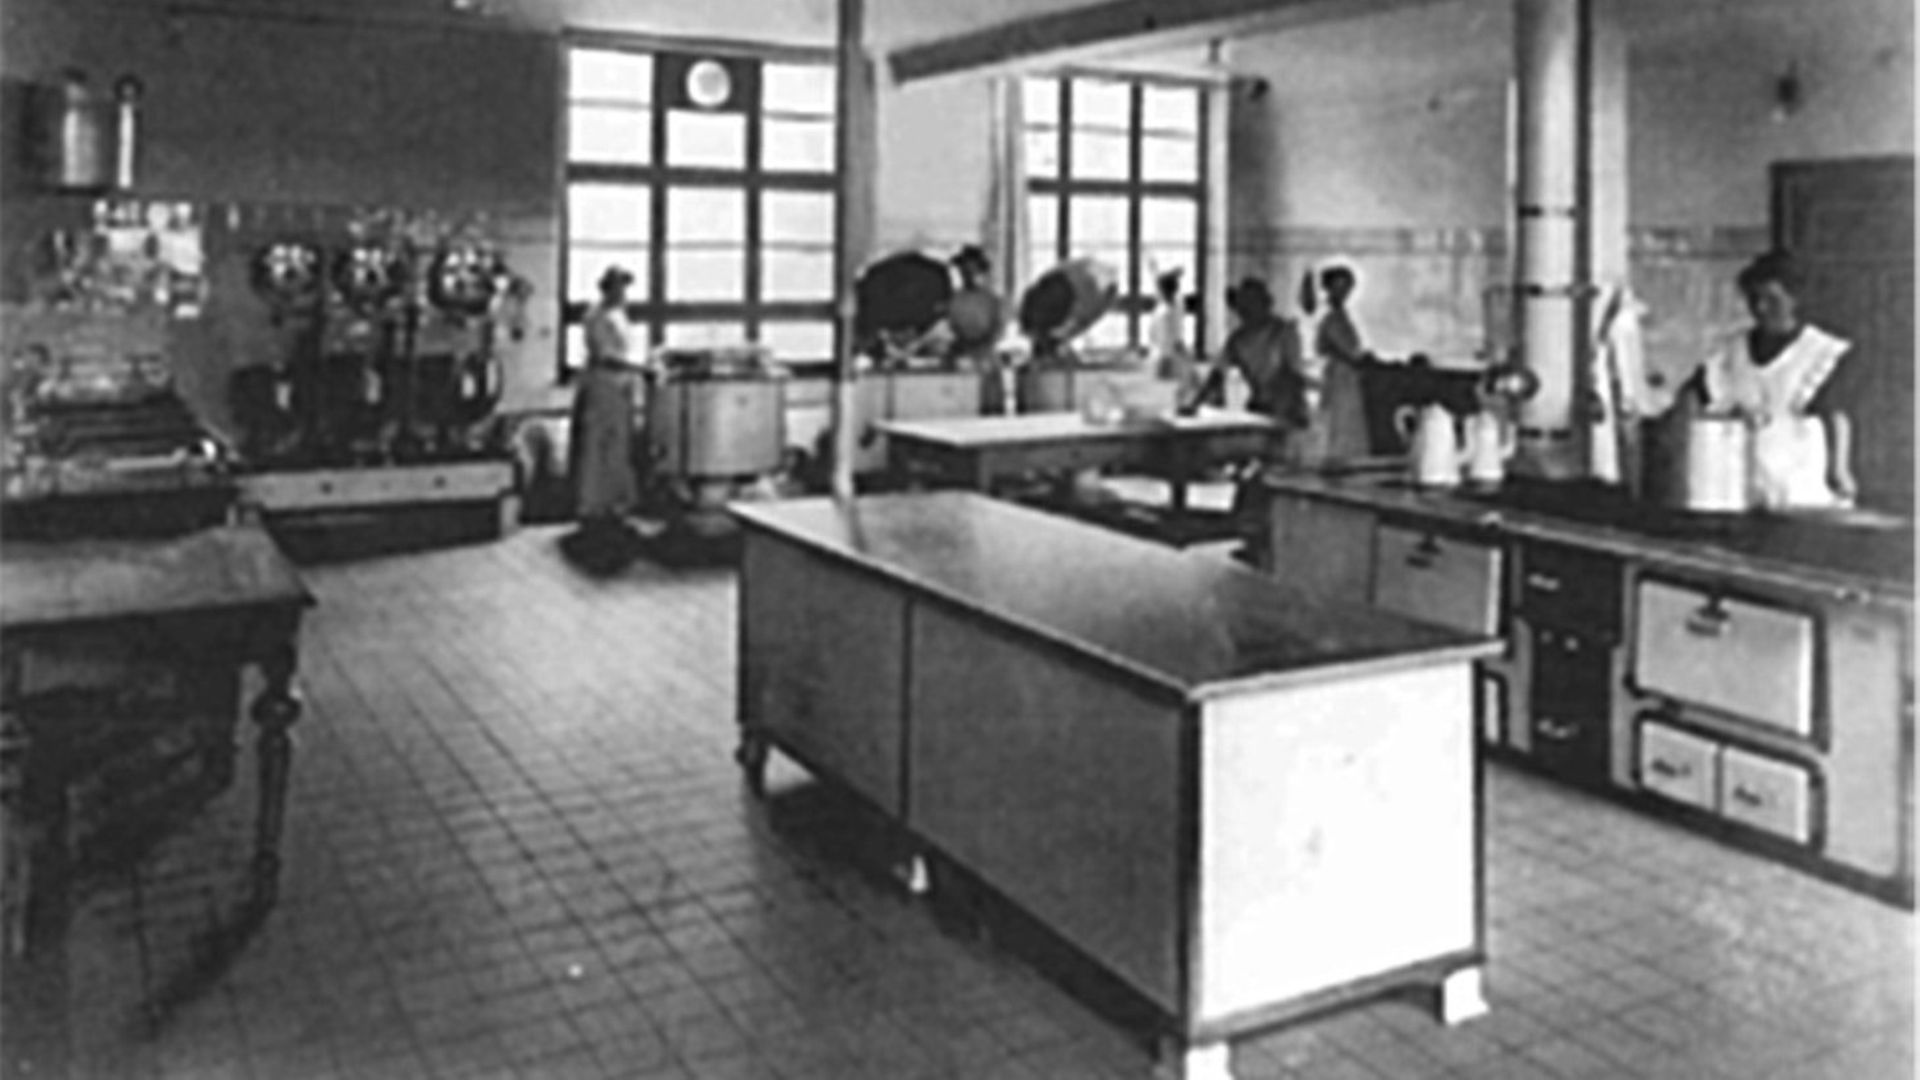 In 1915, the first canteen kitchen was opened